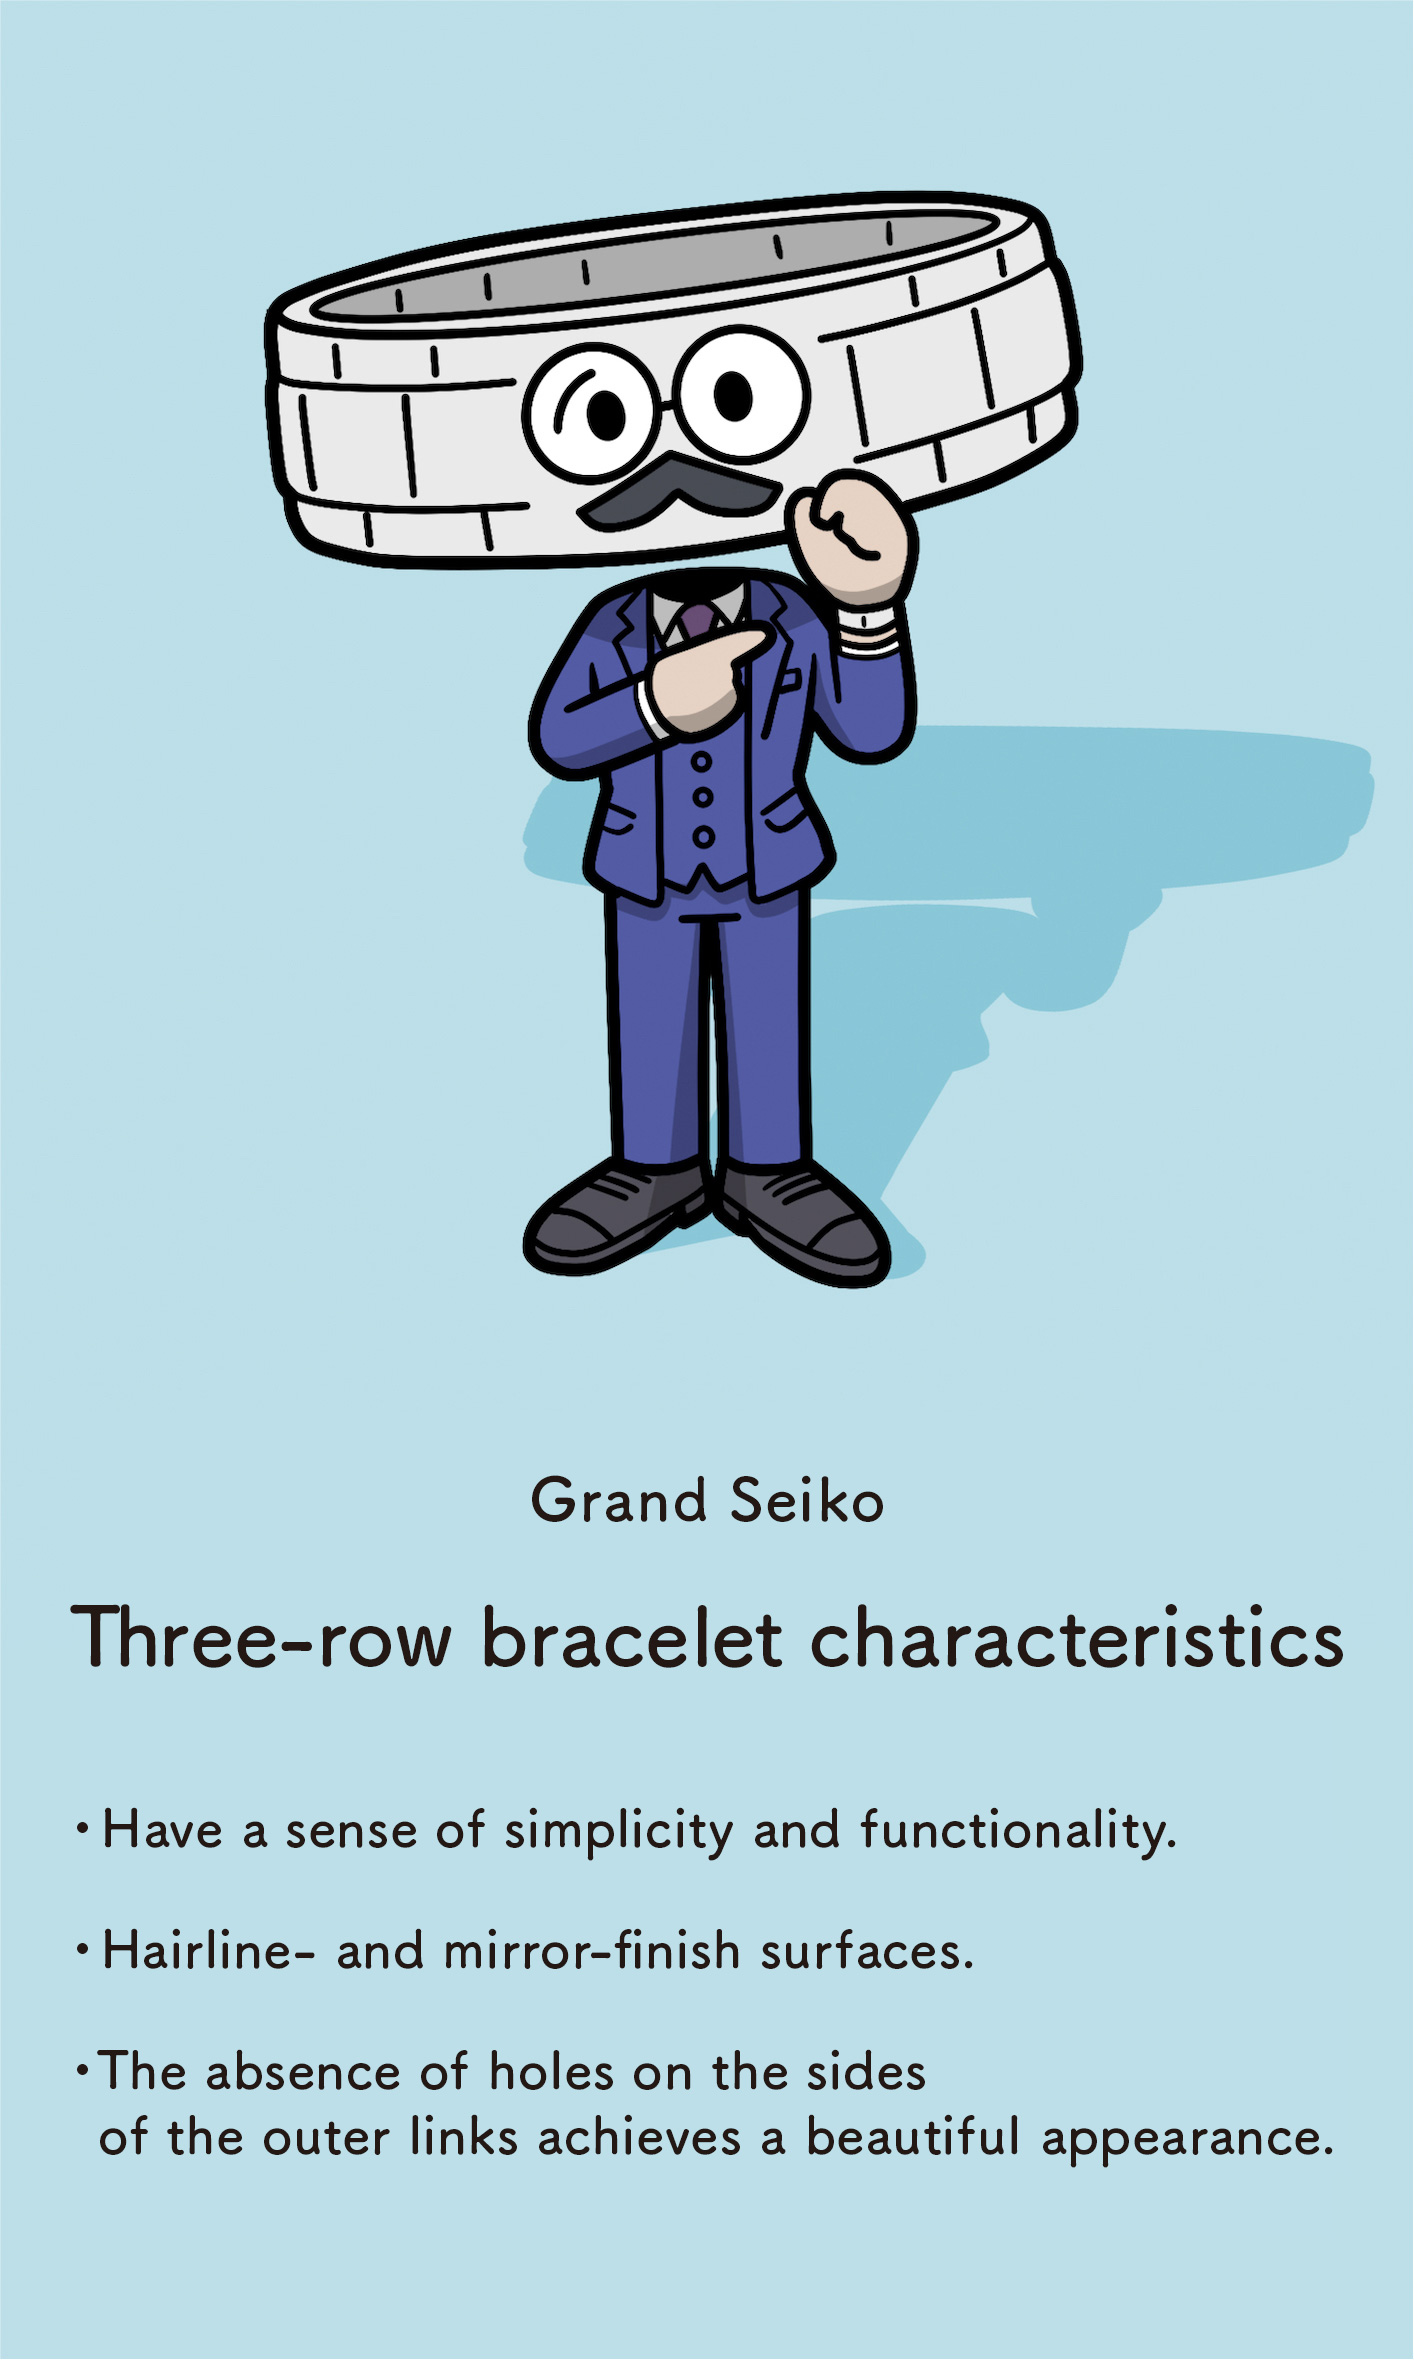 Grand Seiko: Three-row bracelet characteristics - Have a sense of simplicity and functionality - Hairline- and mirror-finish surfaces  The absence of holes on the sides of the outer links achieves a beautiful appearance